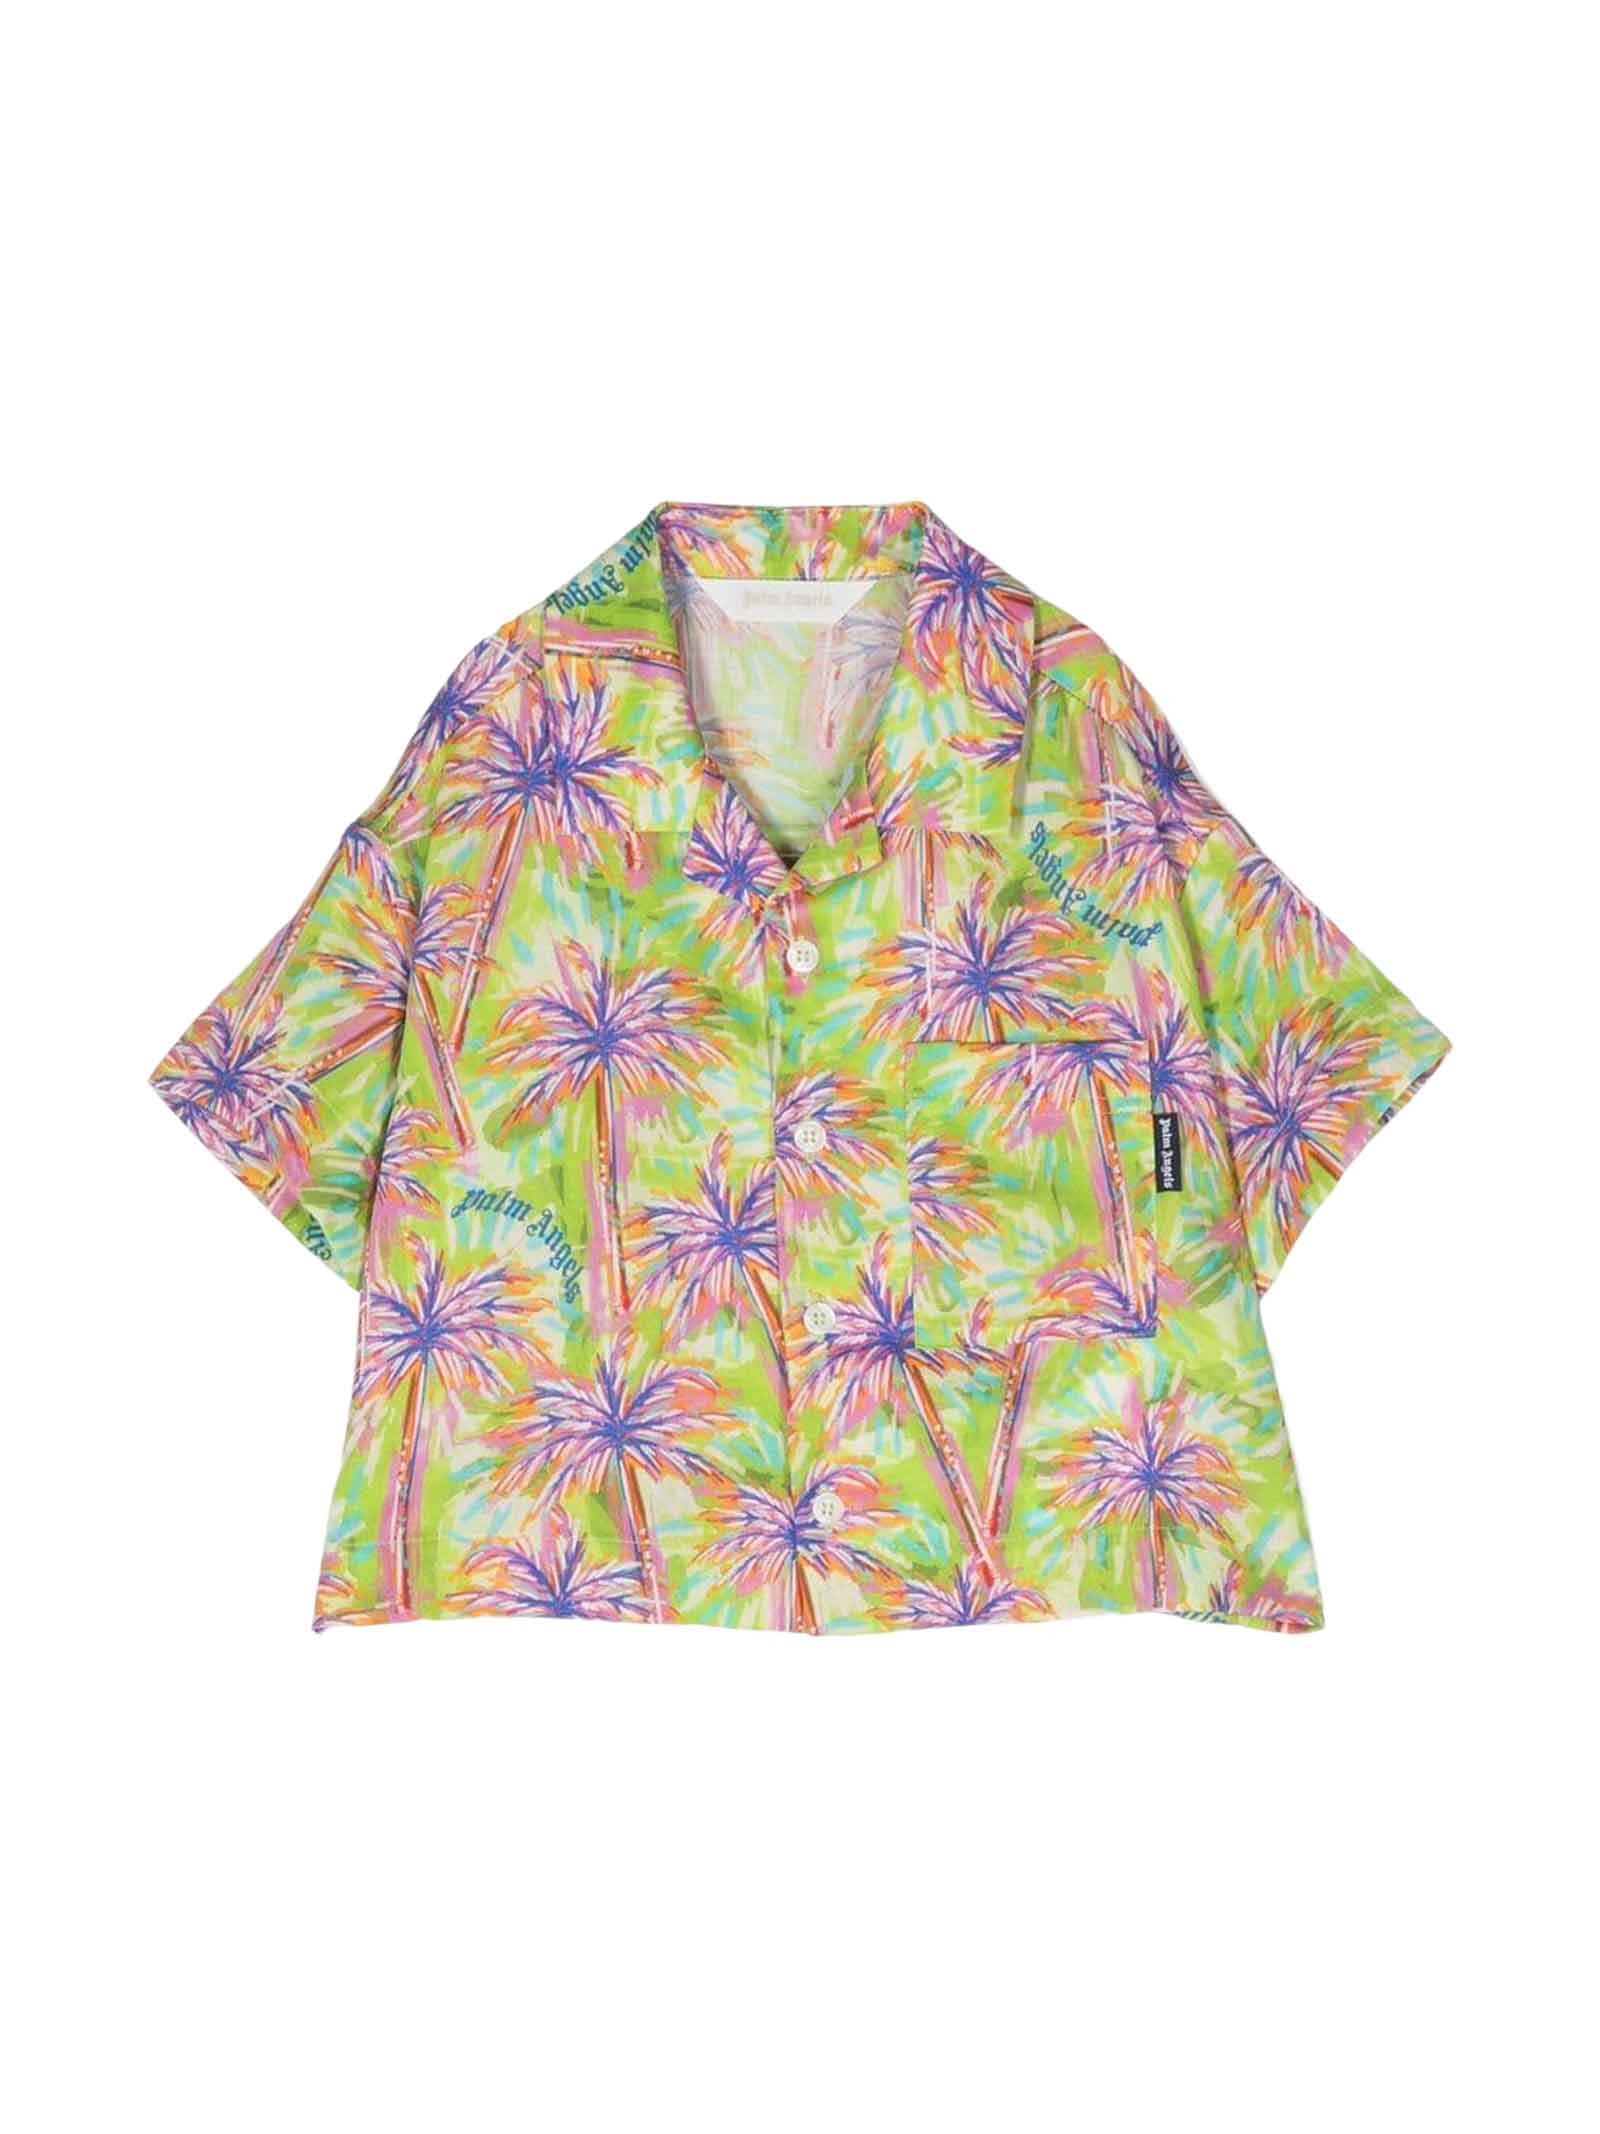 PALM ANGELS MULTICOLOR SHIRT GIRL